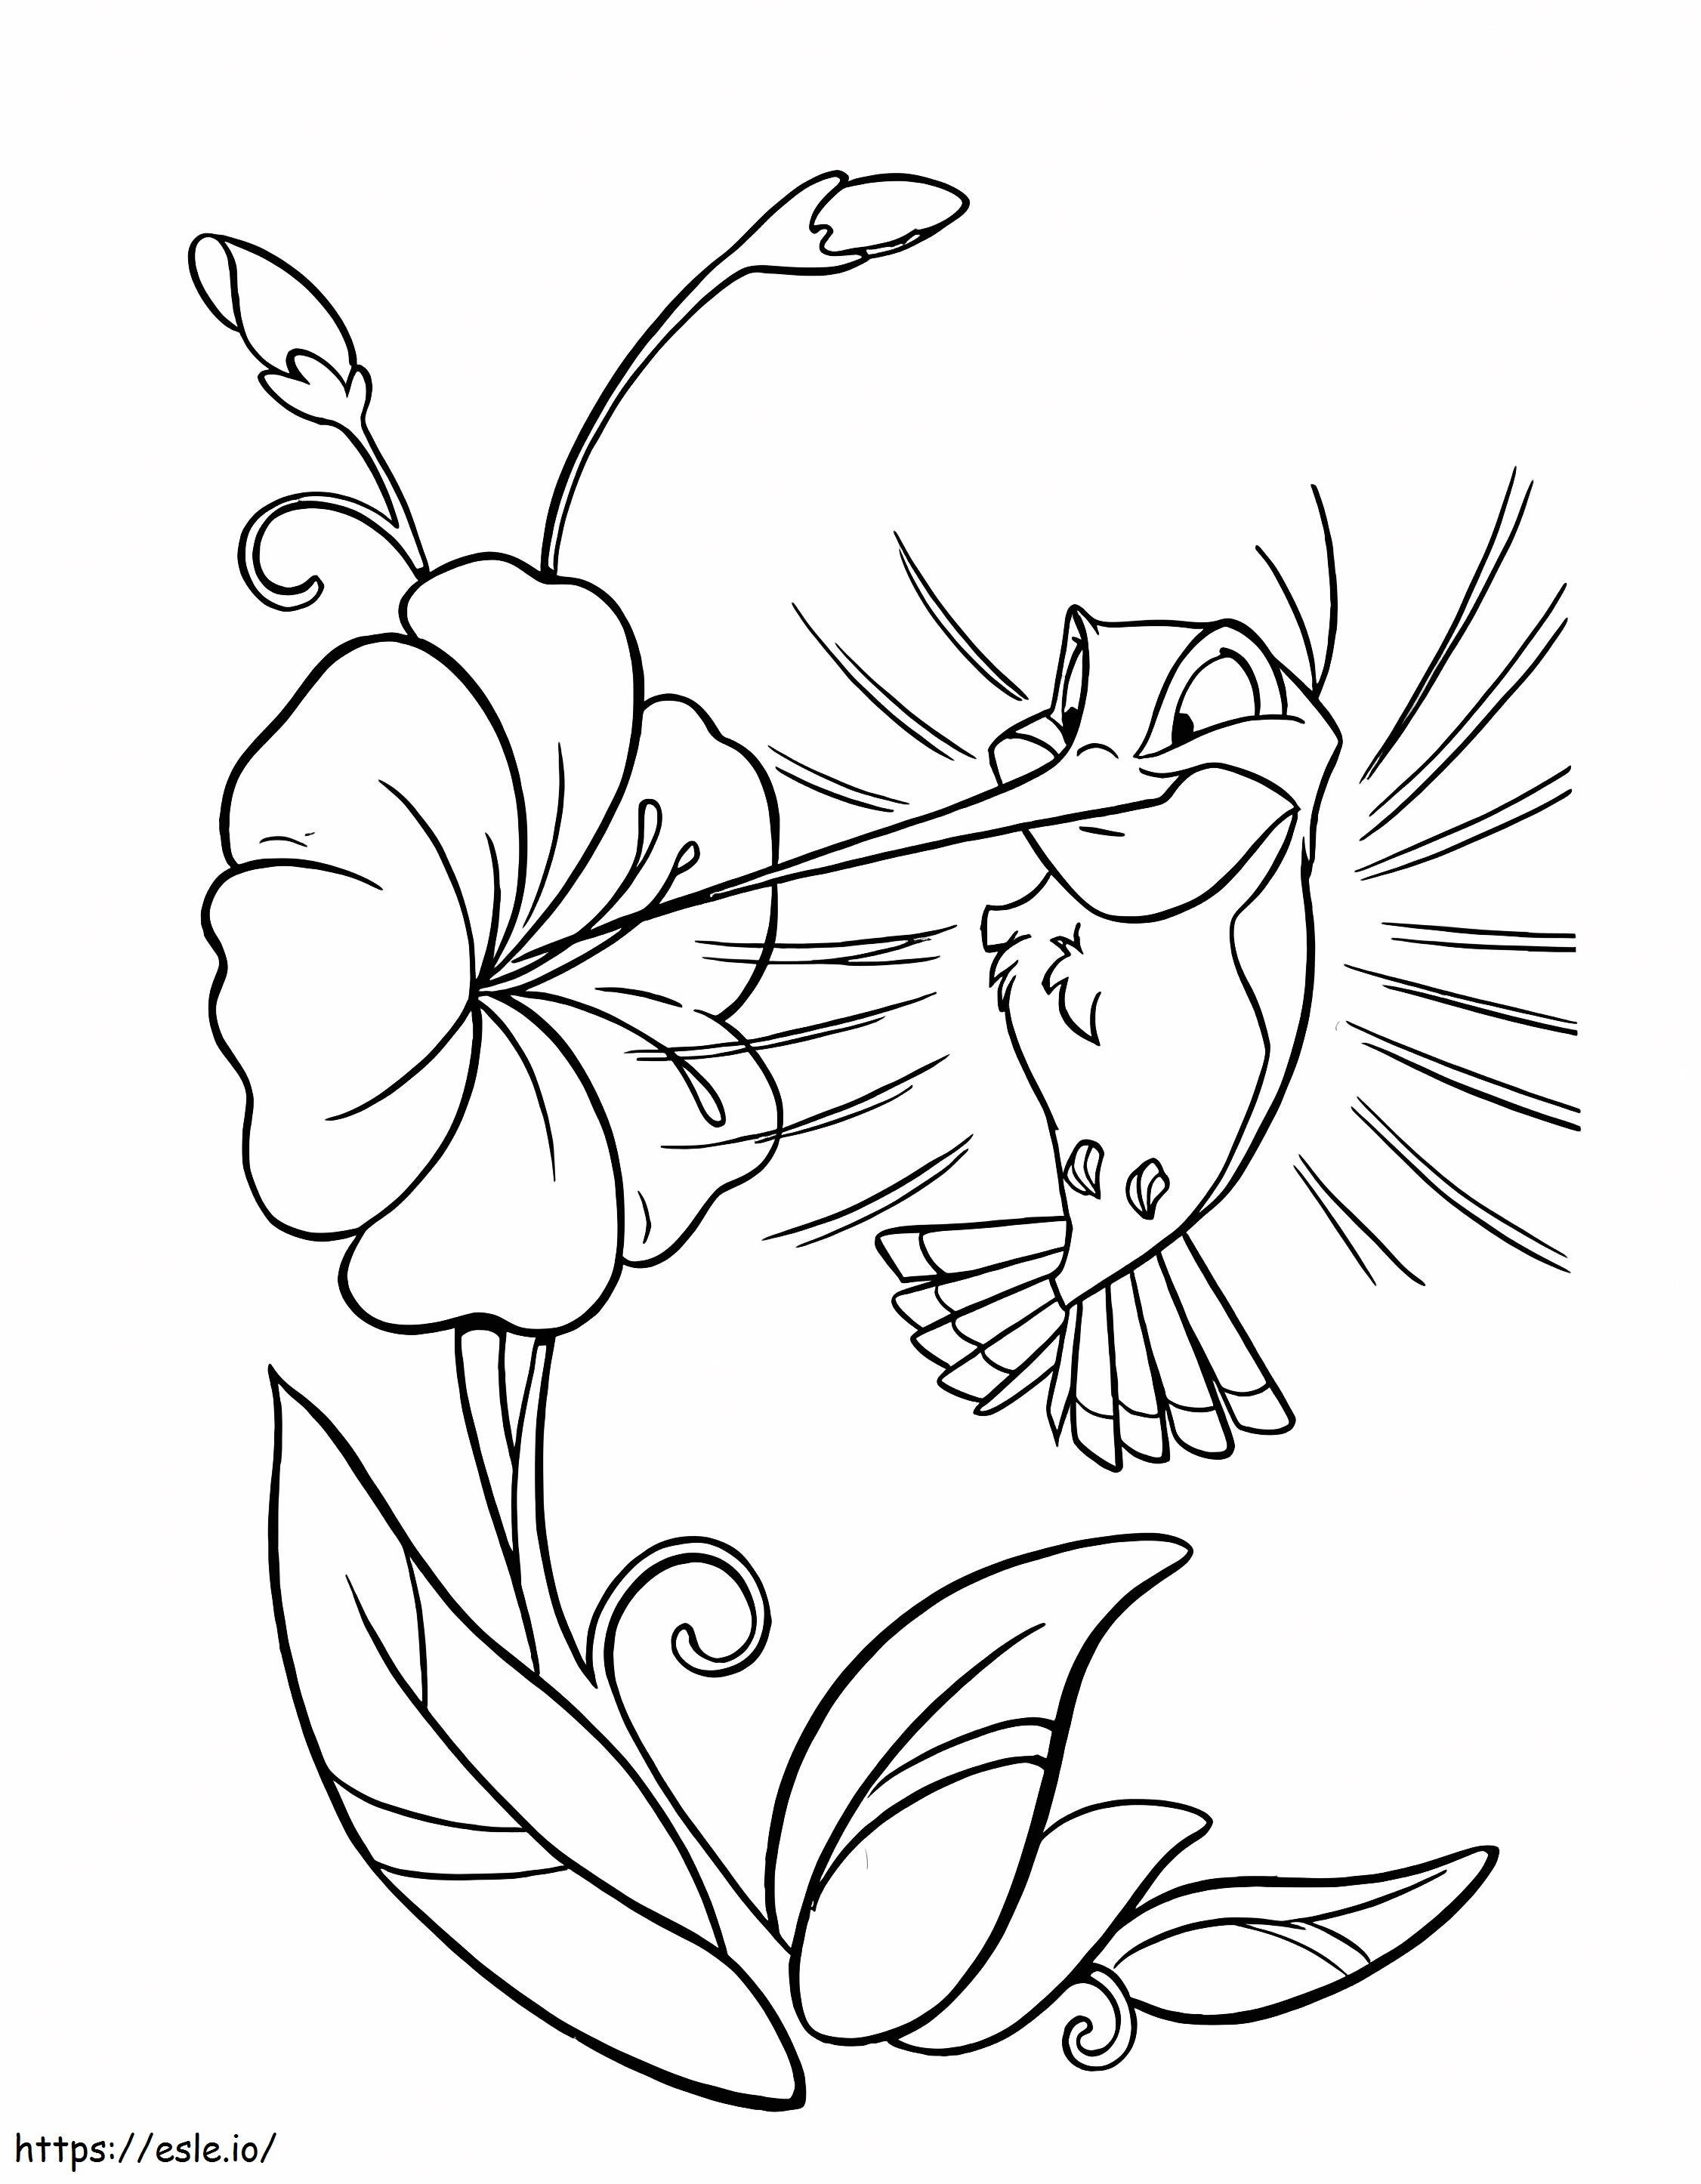 Coloriage  Flit Sipping Nectar A4 à imprimer dessin